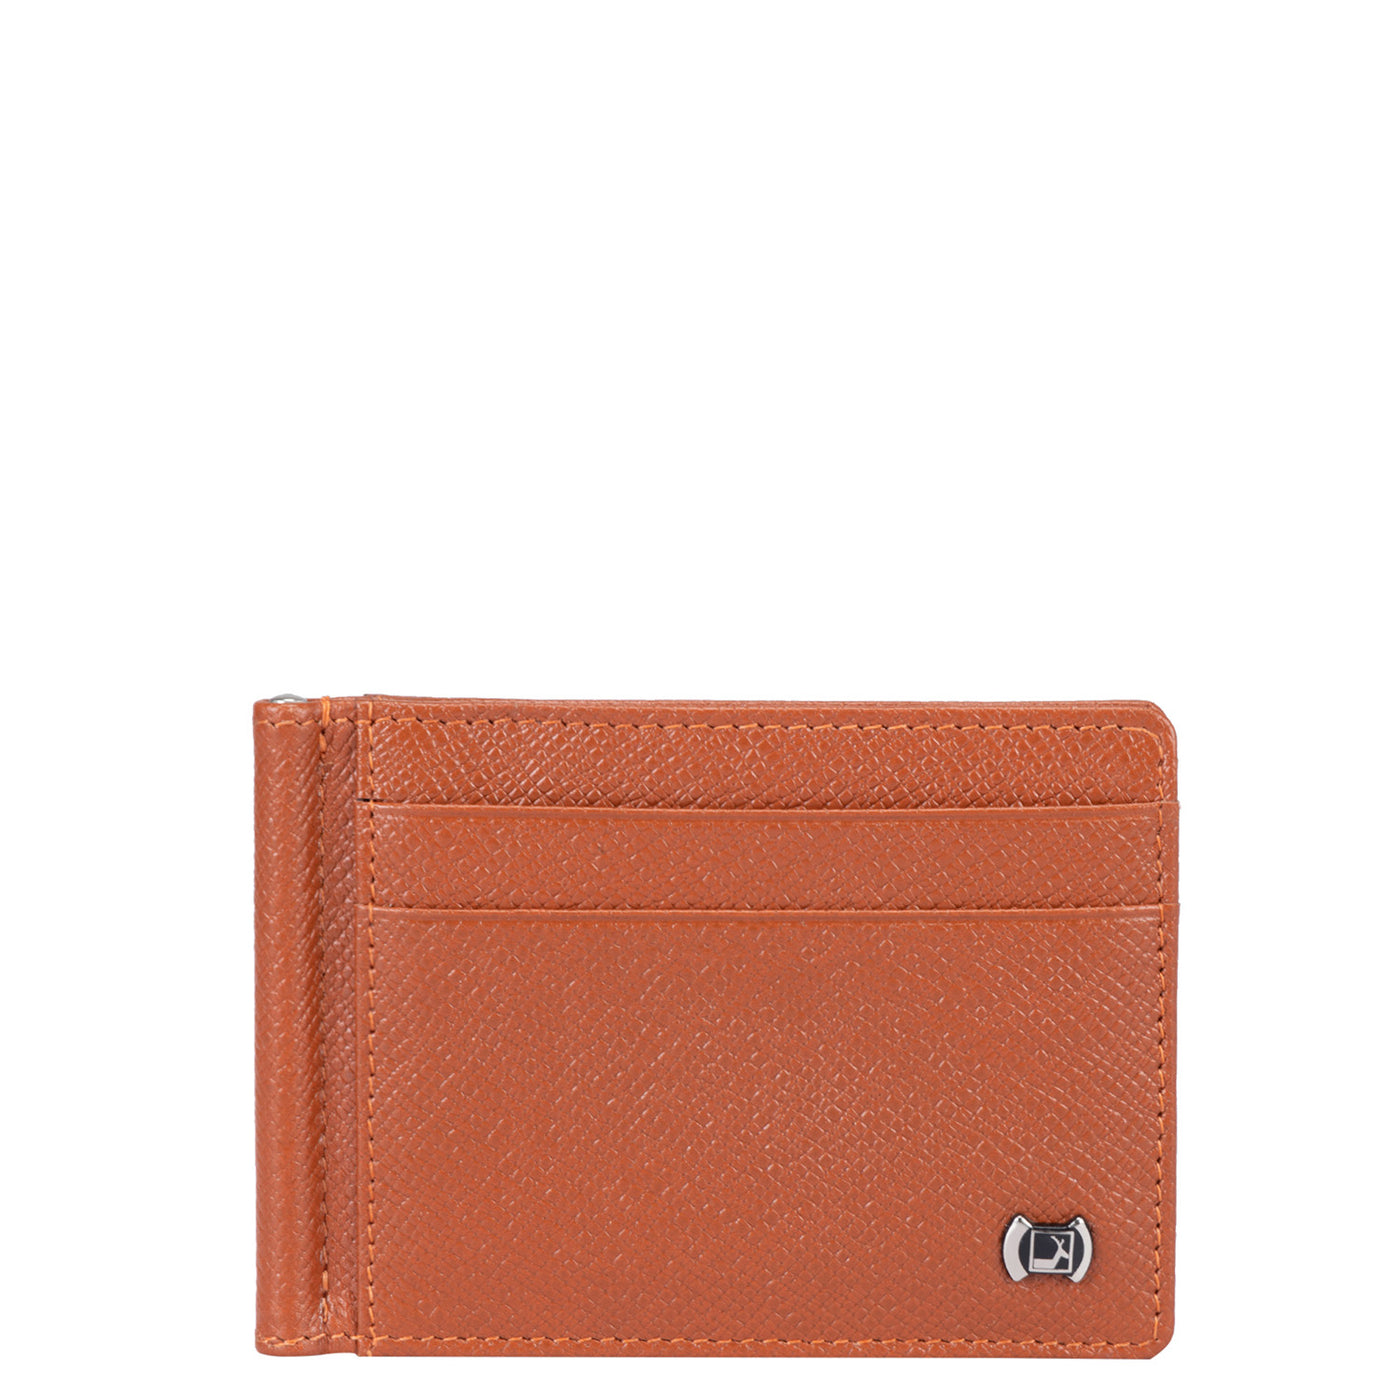 Franzy Leather Money Clip - Rust